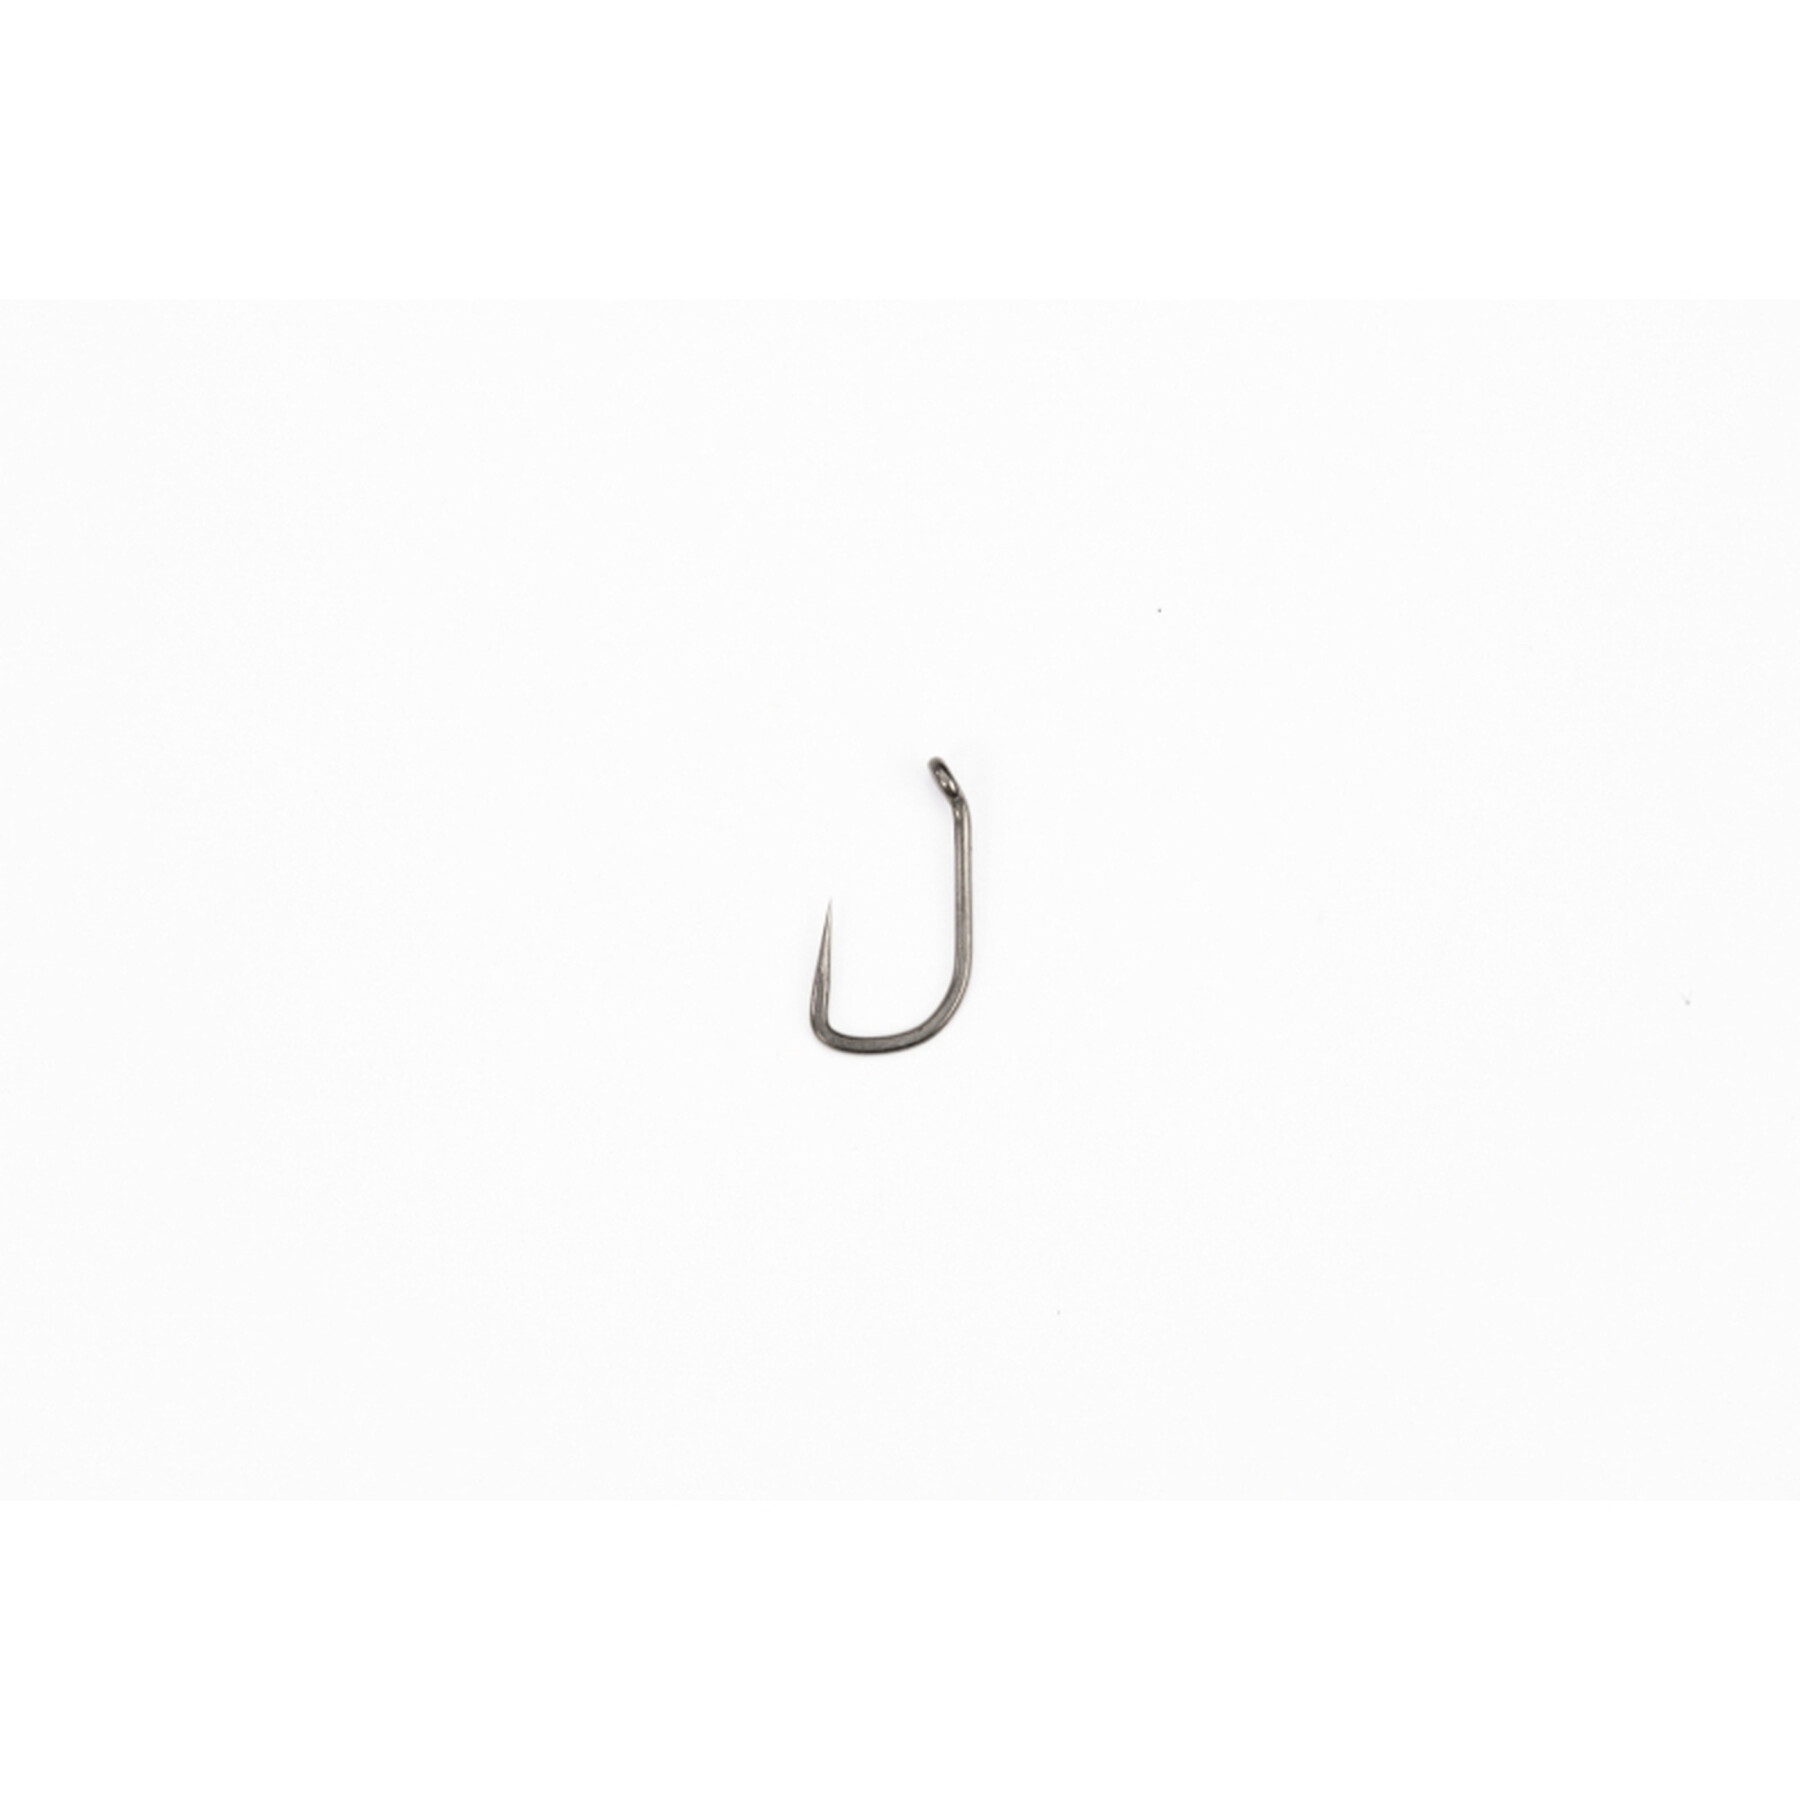 Hook Pinpoint Twister size 4 Micro Barbed